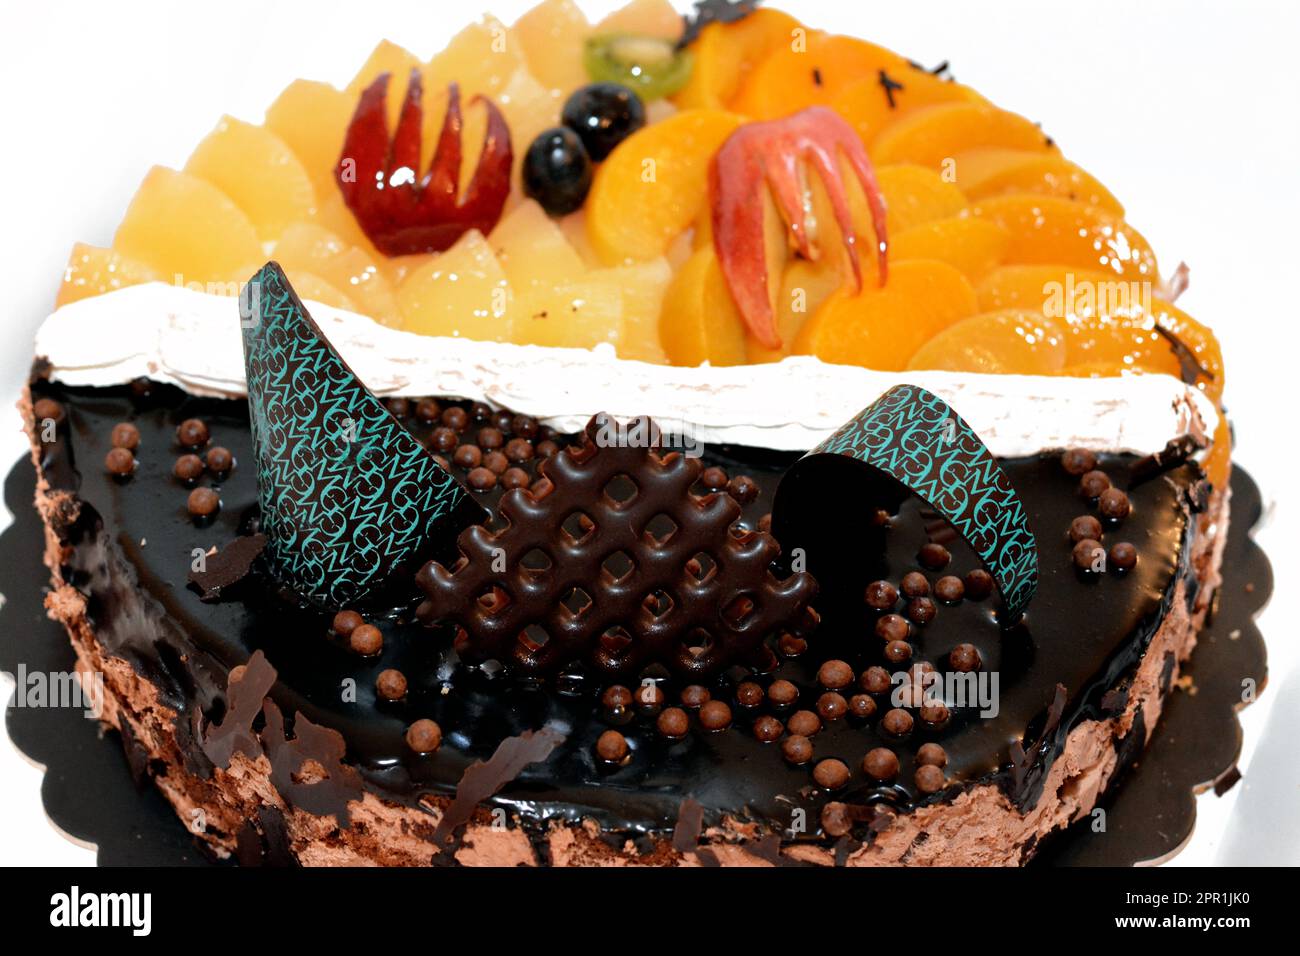 Fresh birthday cake with chocolate bars and pieces, whipped cream, slices of pineapples, apples, black grapes, peach and cherry, a top view of a baked Stock Photo